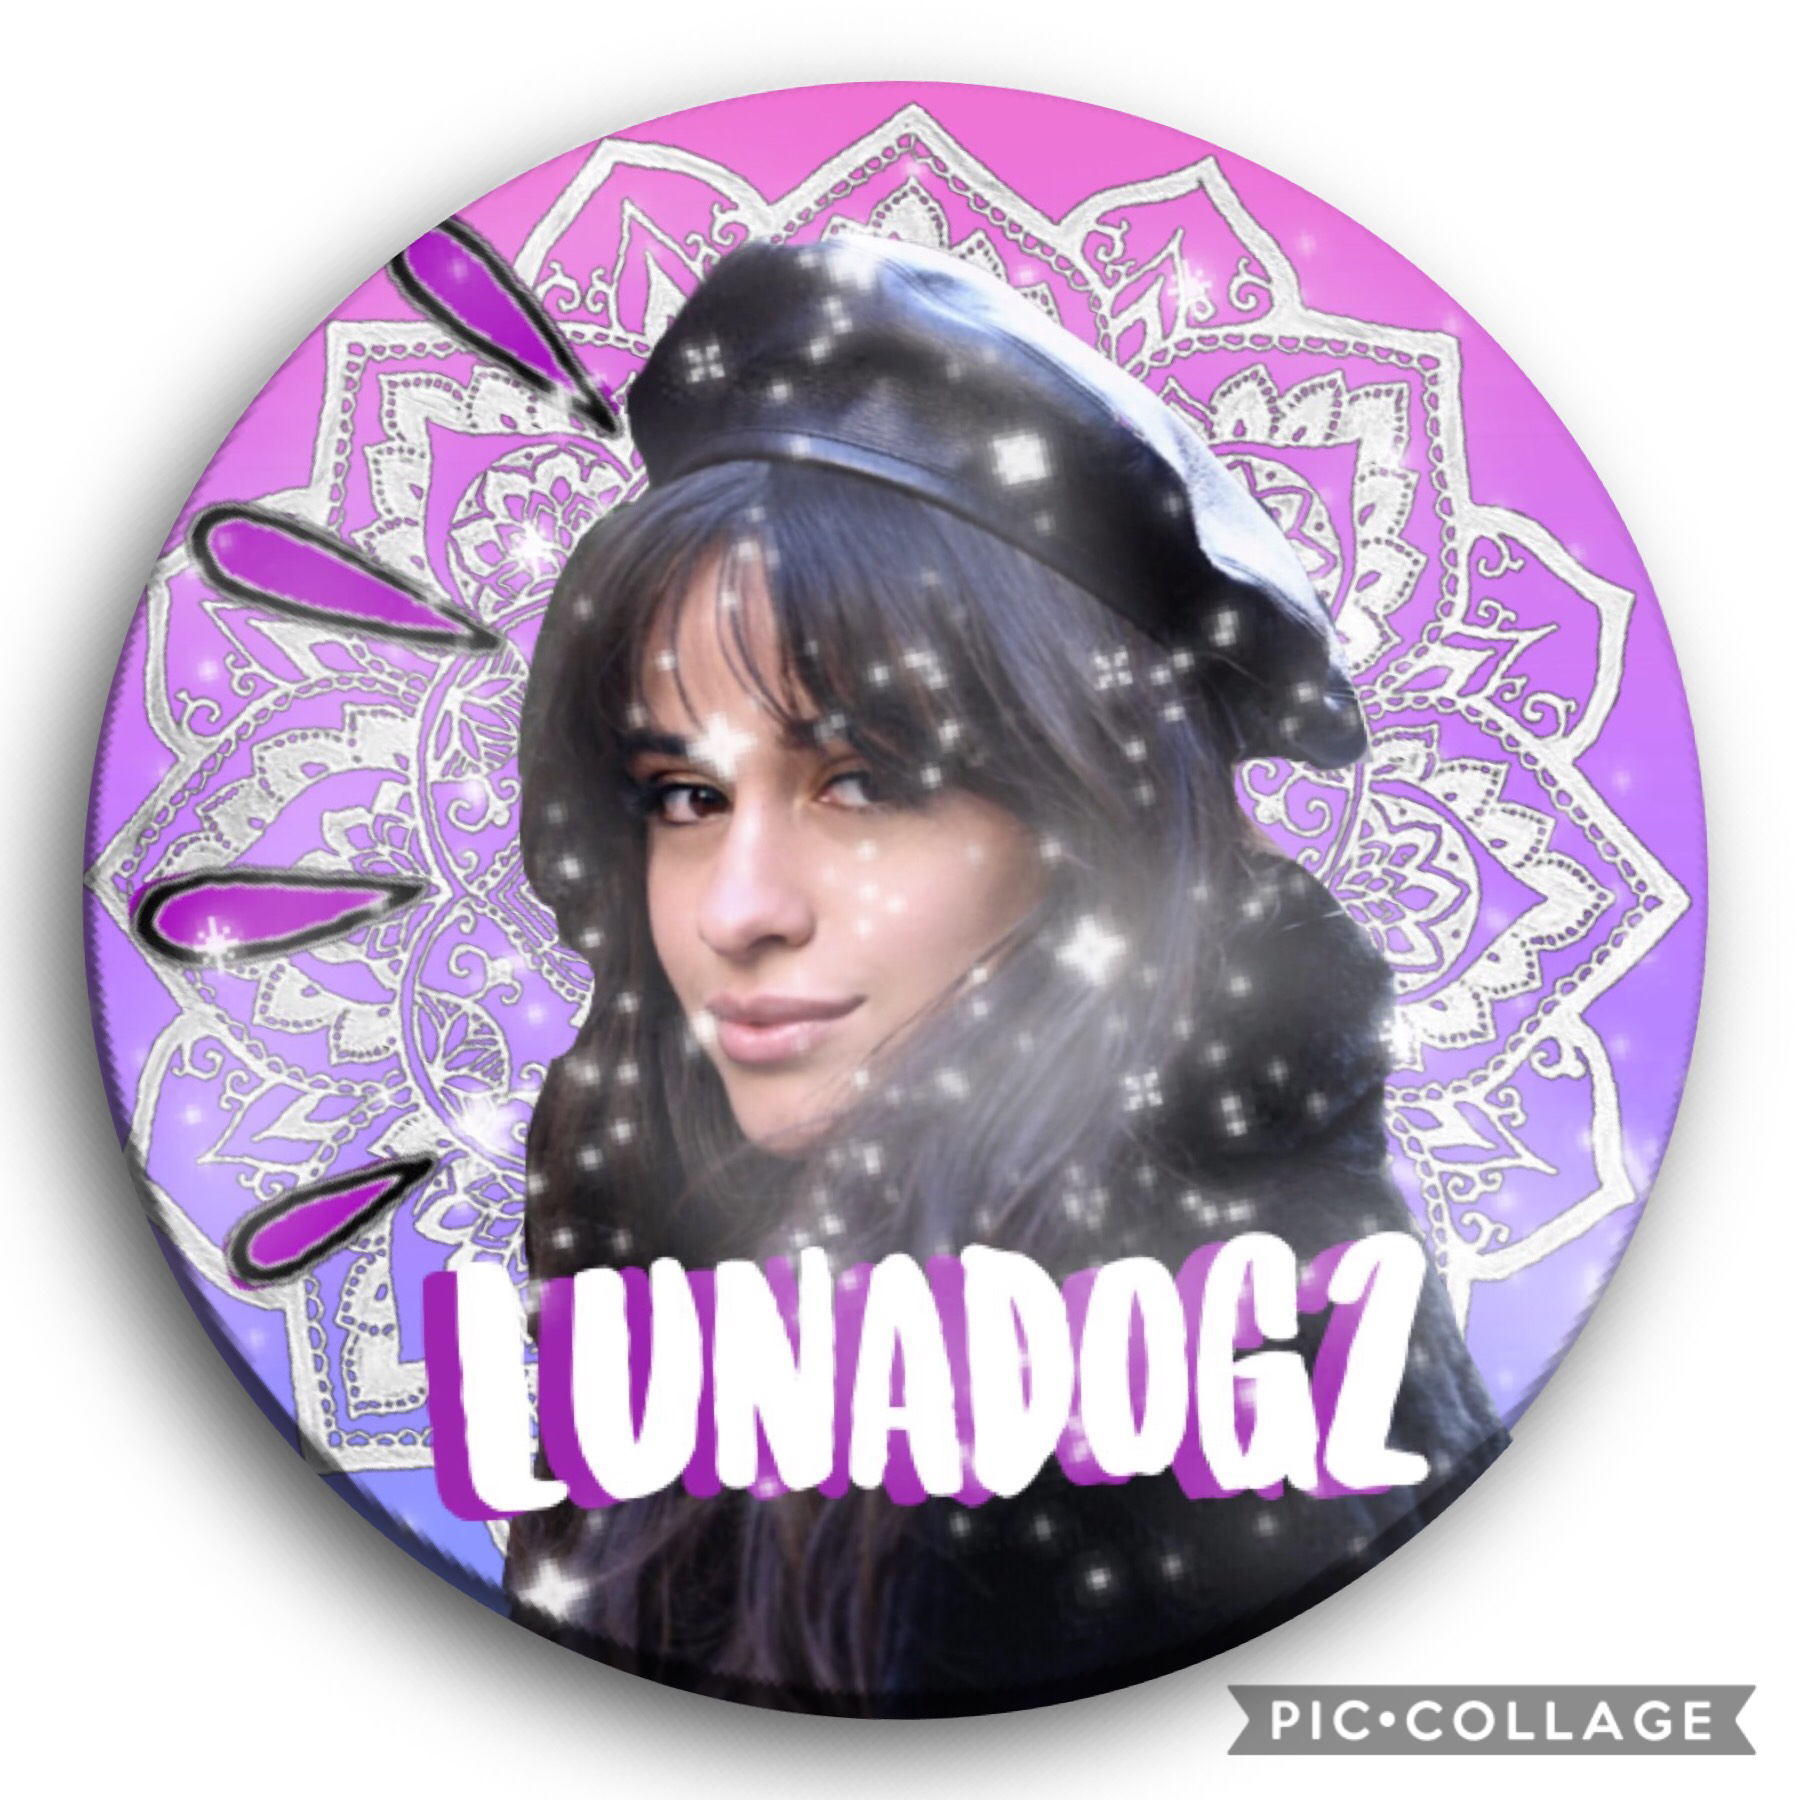 Icon for...
LunaDog2! Thank you for filling out my icon form! I hope you like your icon and if you use it, pls give credit💕